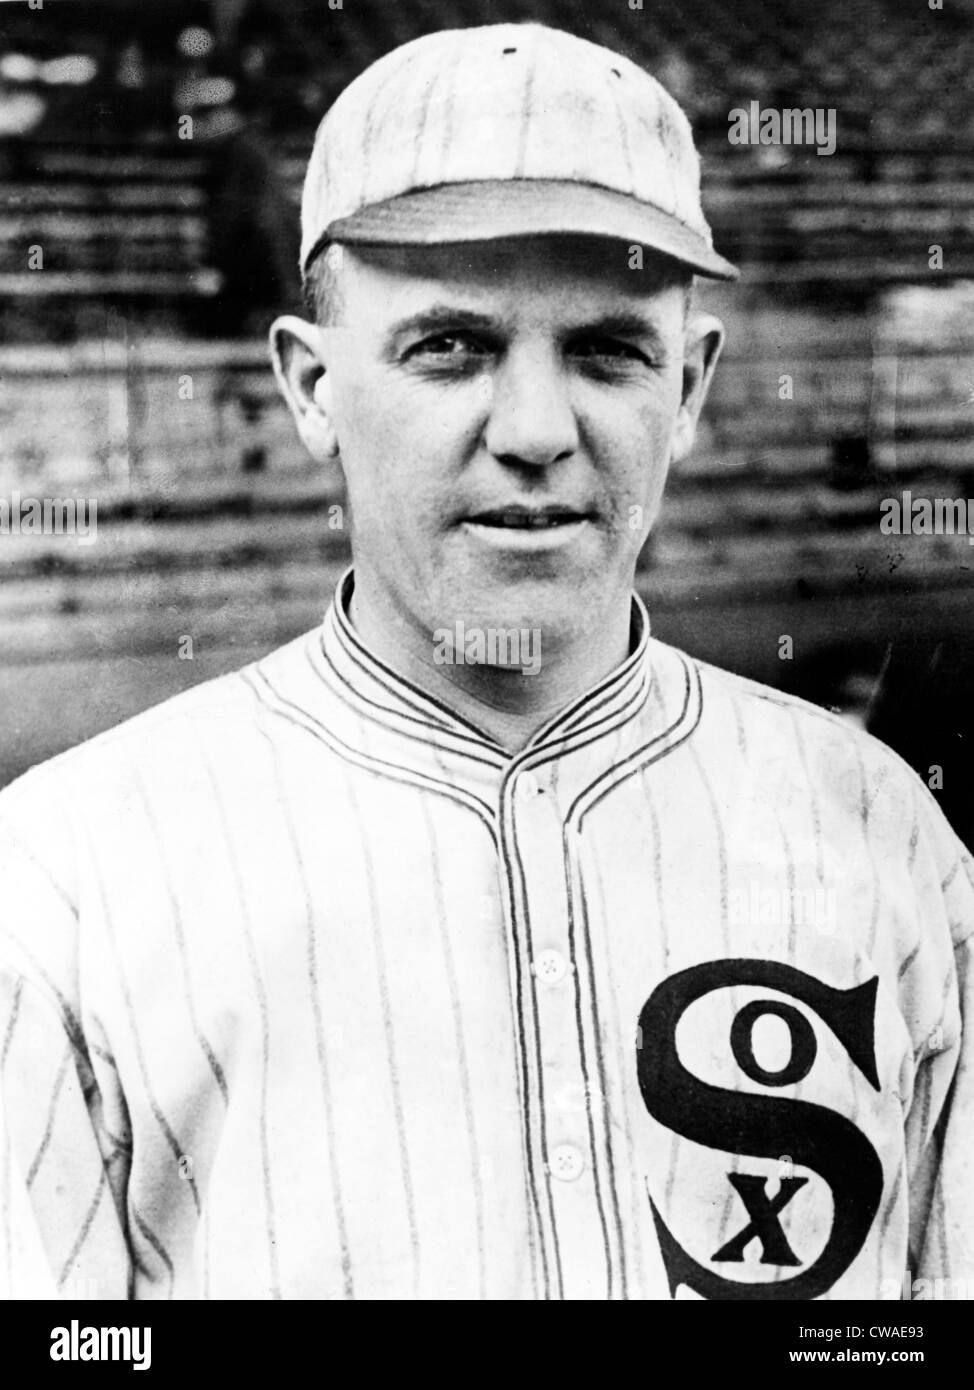 BASEBALL, Eddie Cicotte, pitcher & player for the Chicago White Sox baseball team, from 1912-1920.. Courtesy: CSU Archives / Stock Photo